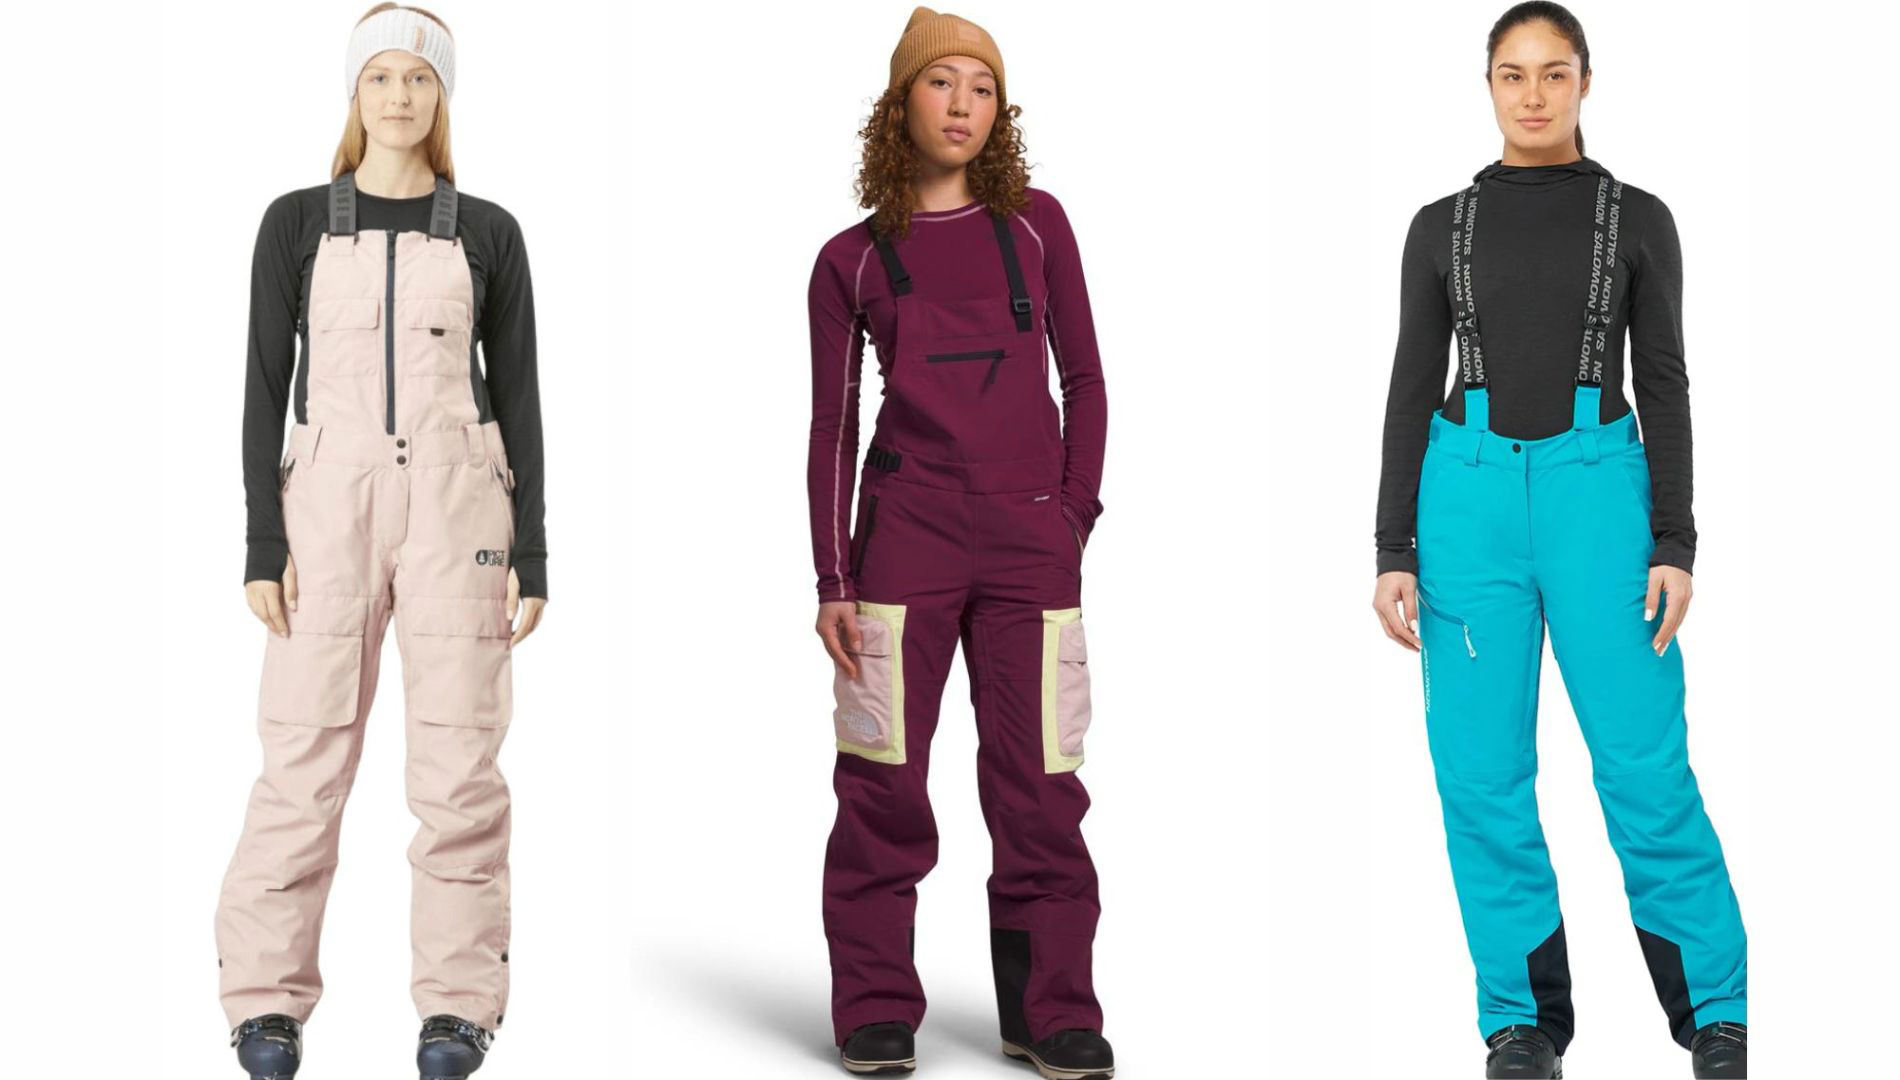 These awesome snow pants are perfect for all winter activities